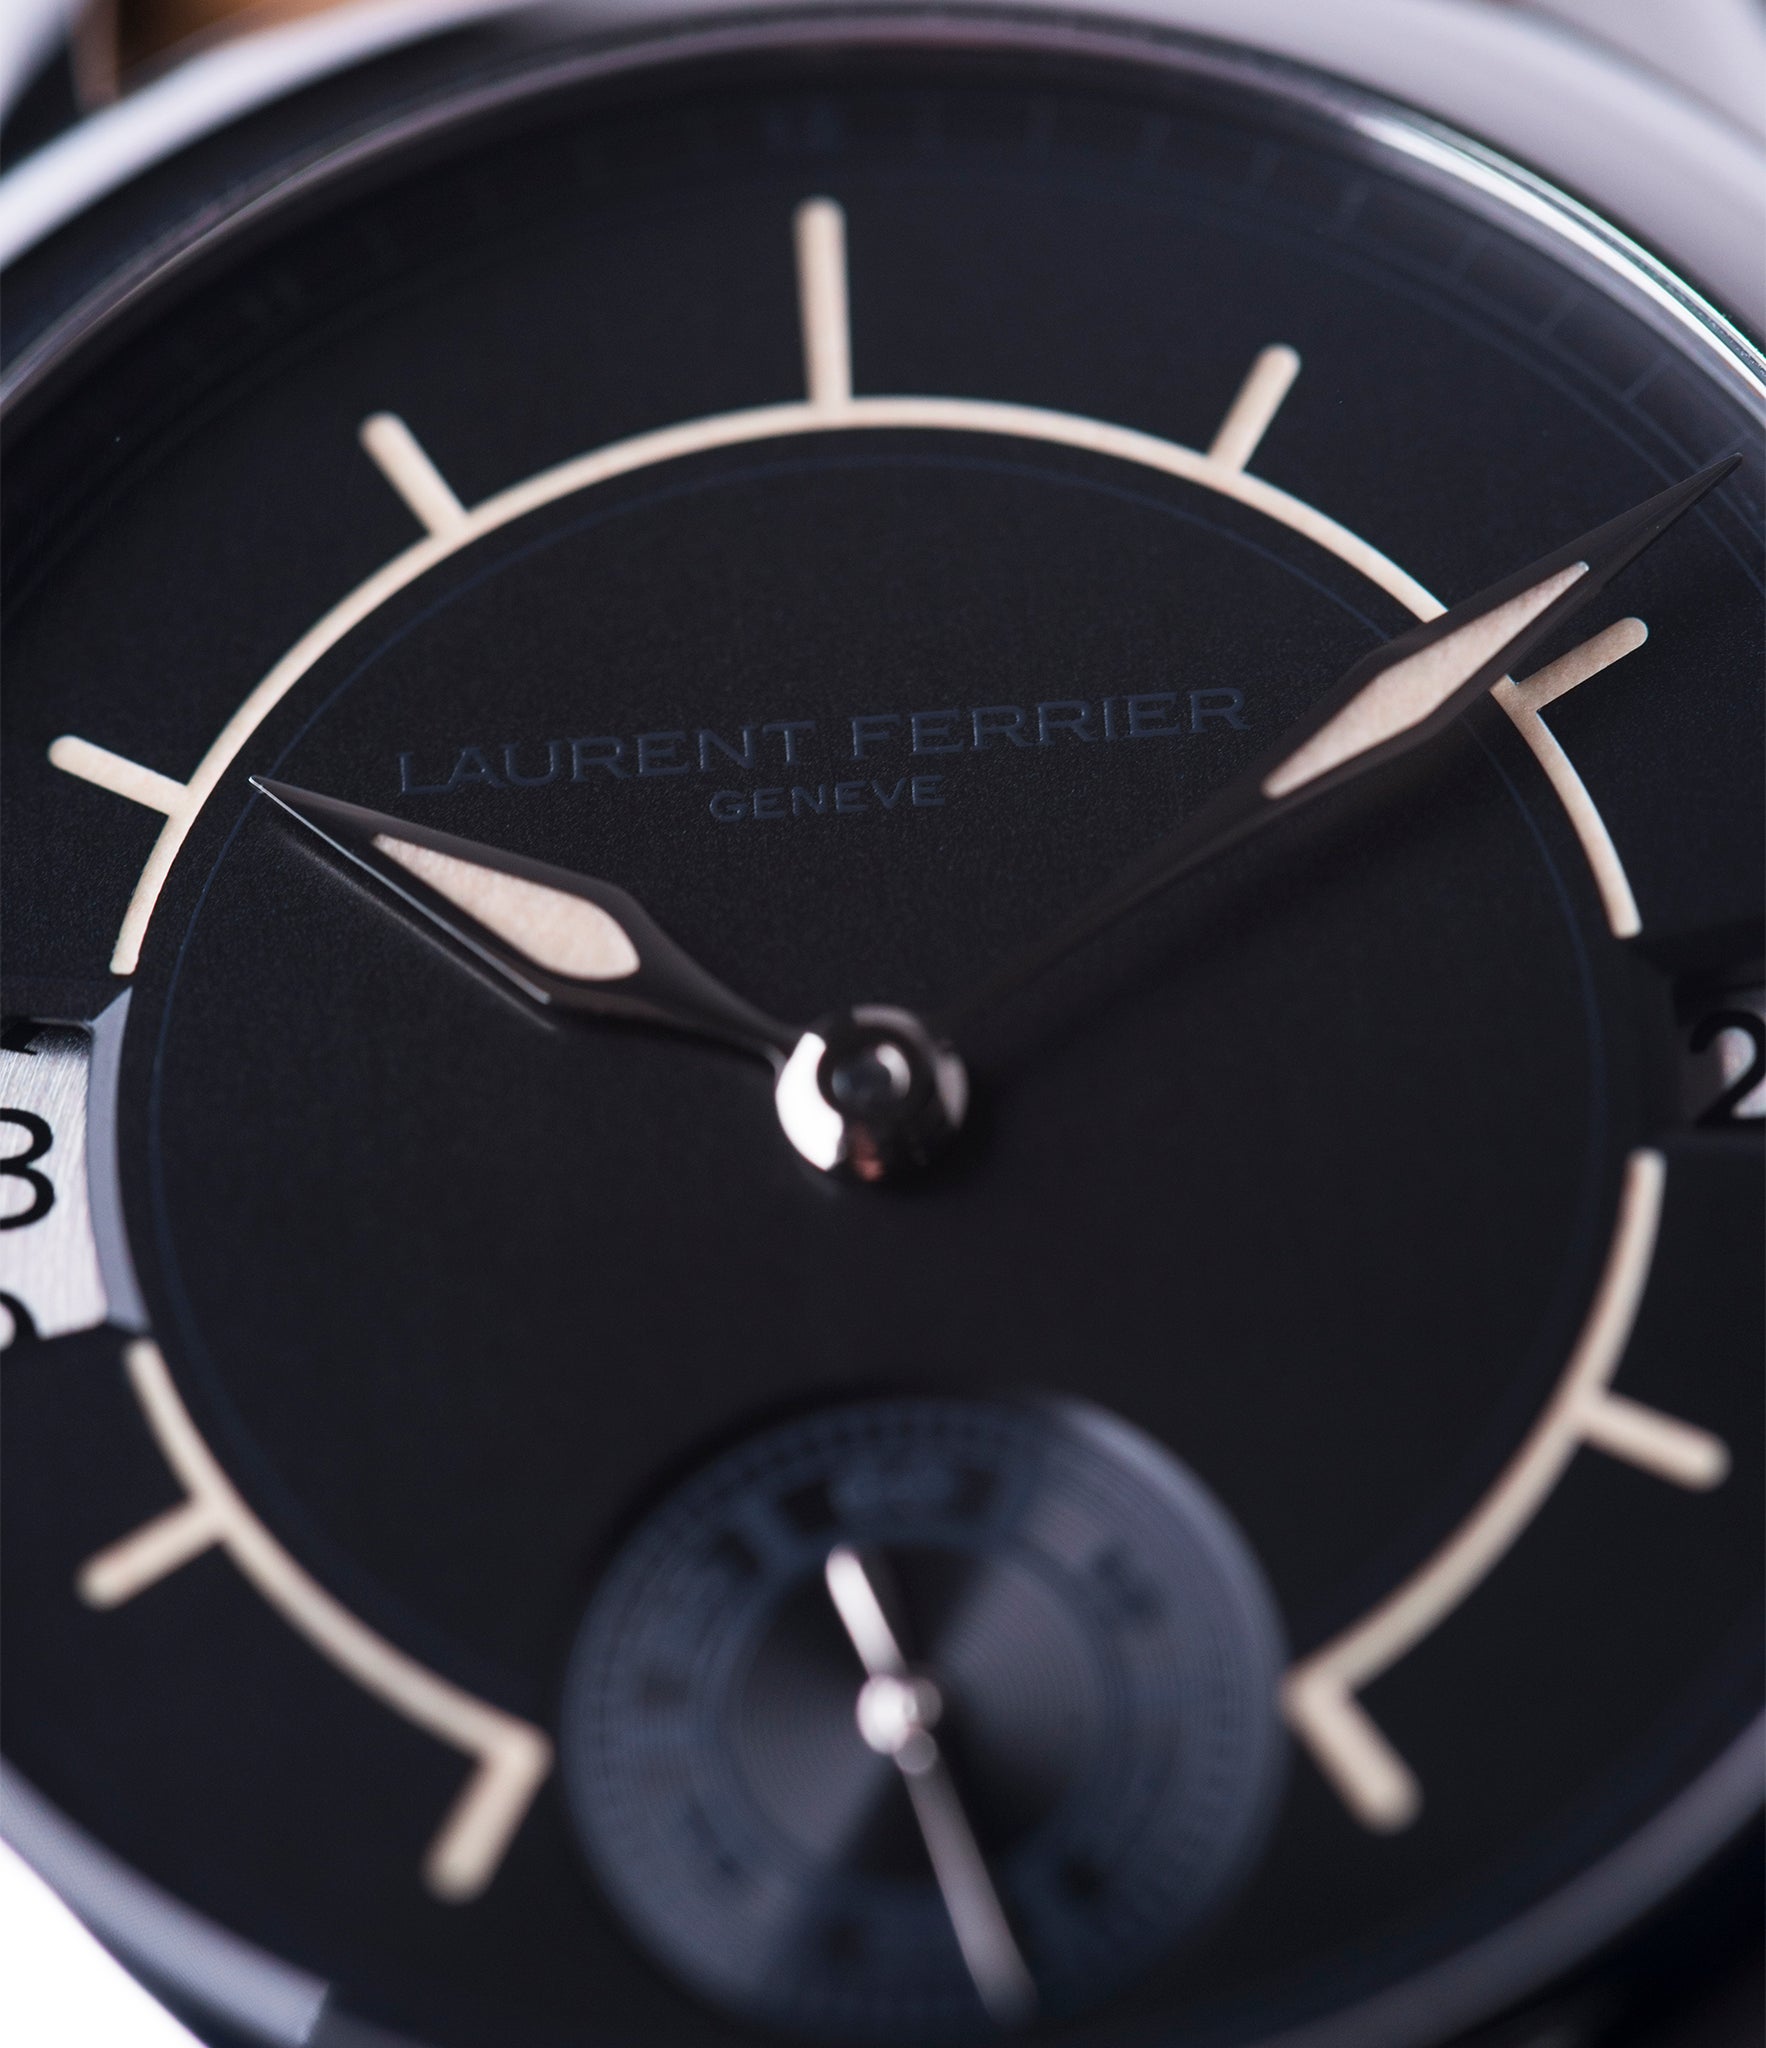 black dial Laurent Ferrier Galet Traveller Boreal steel dual-timezone black dial dress watch for sale online at A Collected Man London approved seller of pre-owned Laurent Ferrier independent watchmakers